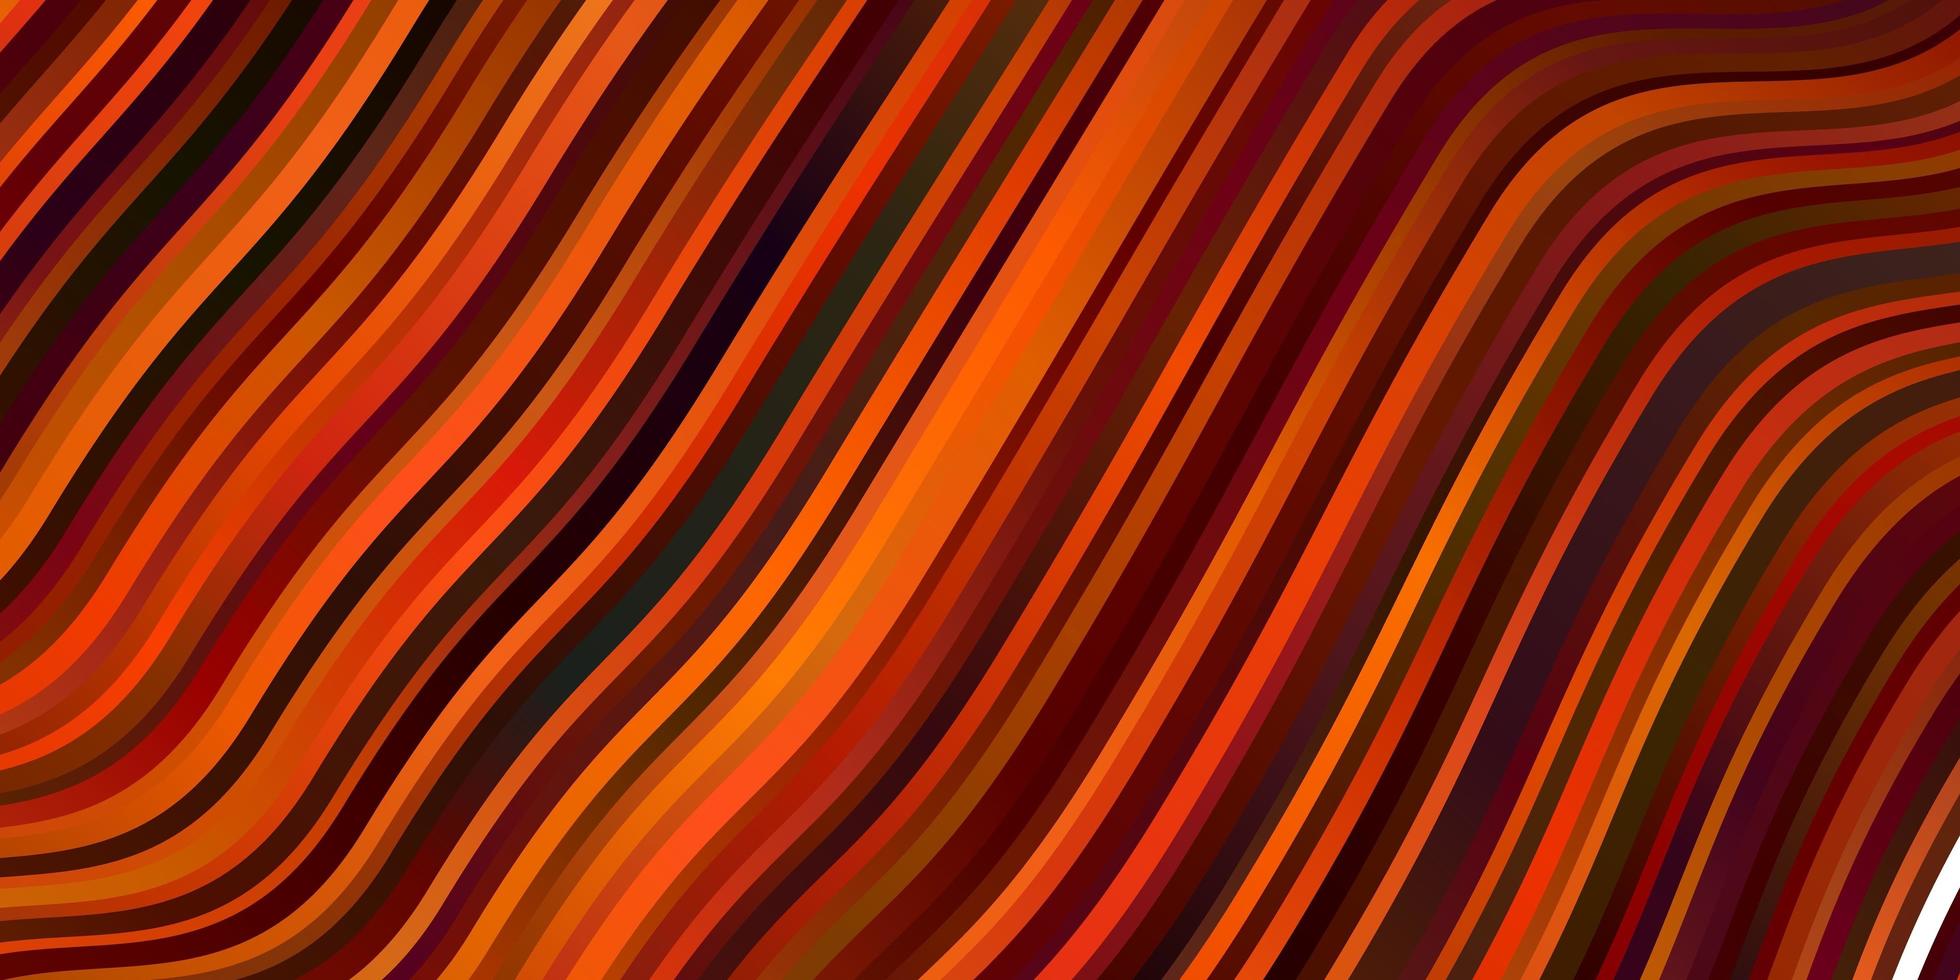 Dark Orange vector texture with circular arc. Abstract illustration with bandy gradient lines. Best design for your posters, banners.